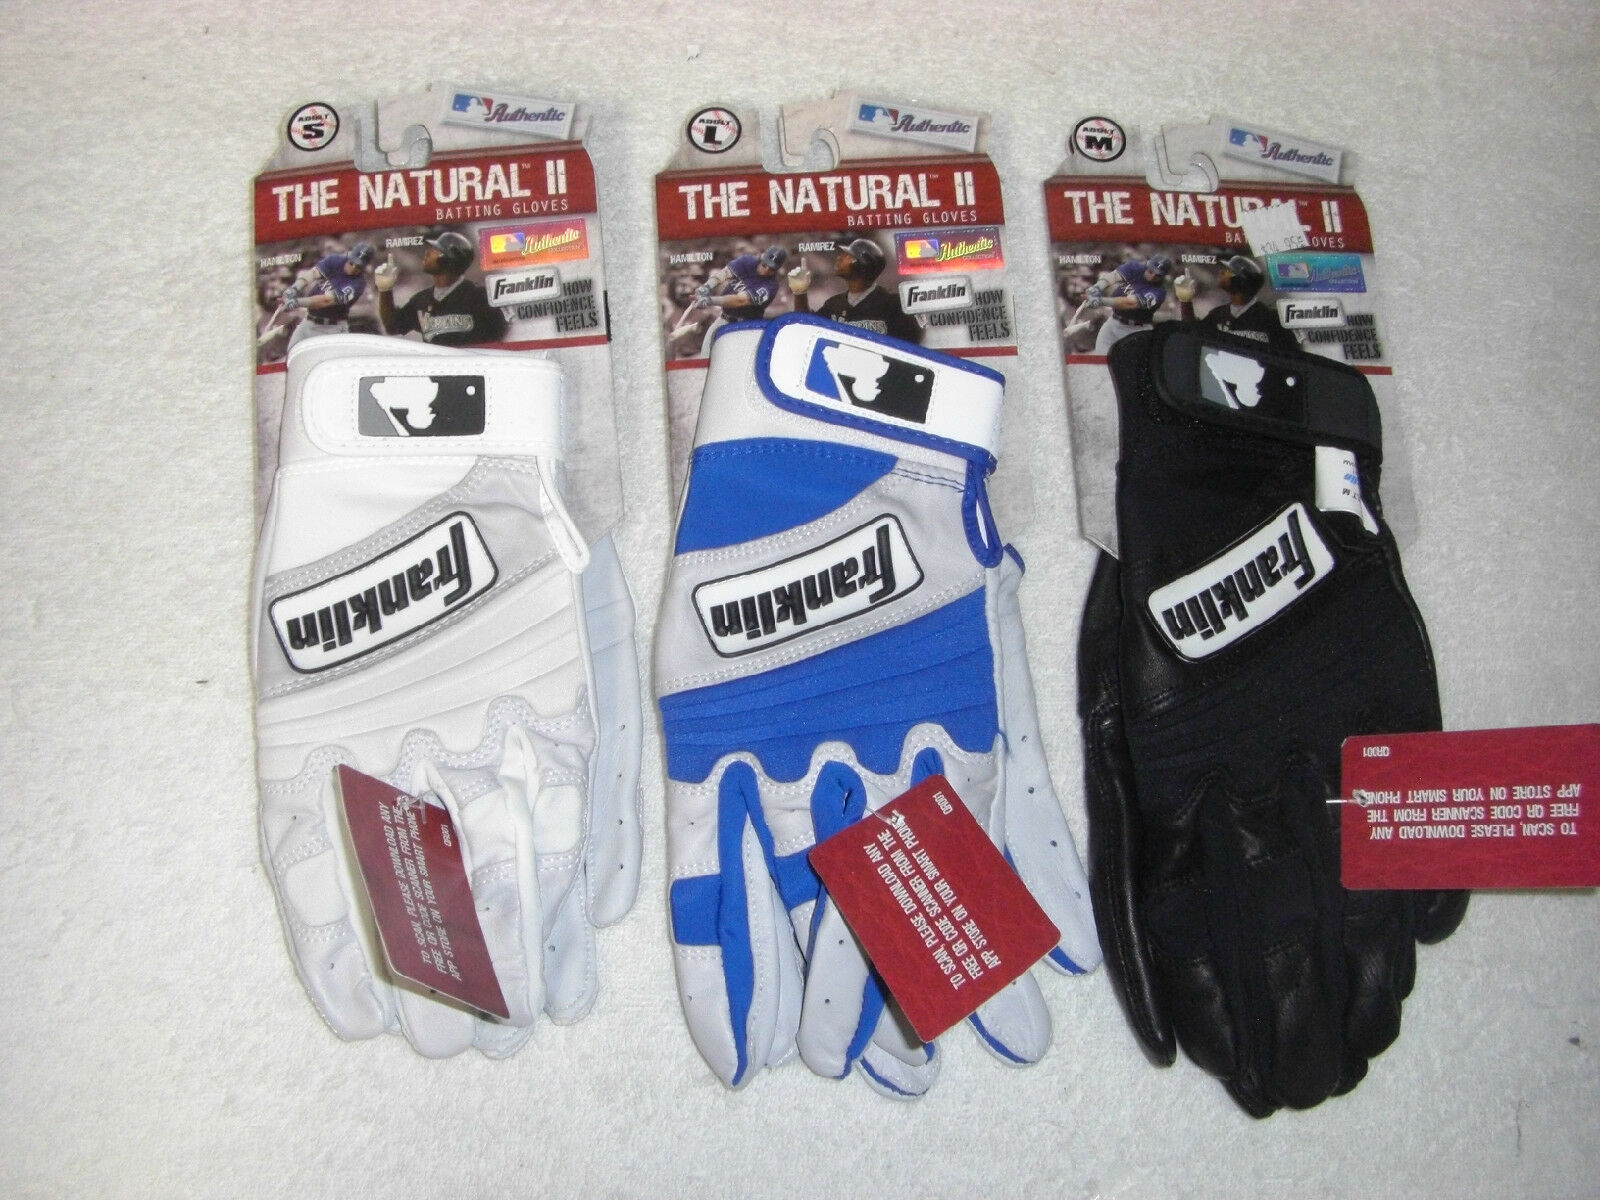 FRANKLIN THE NATURAL II ADULT BATTING GLOVES - VARIOUS COLORS AND SIZES